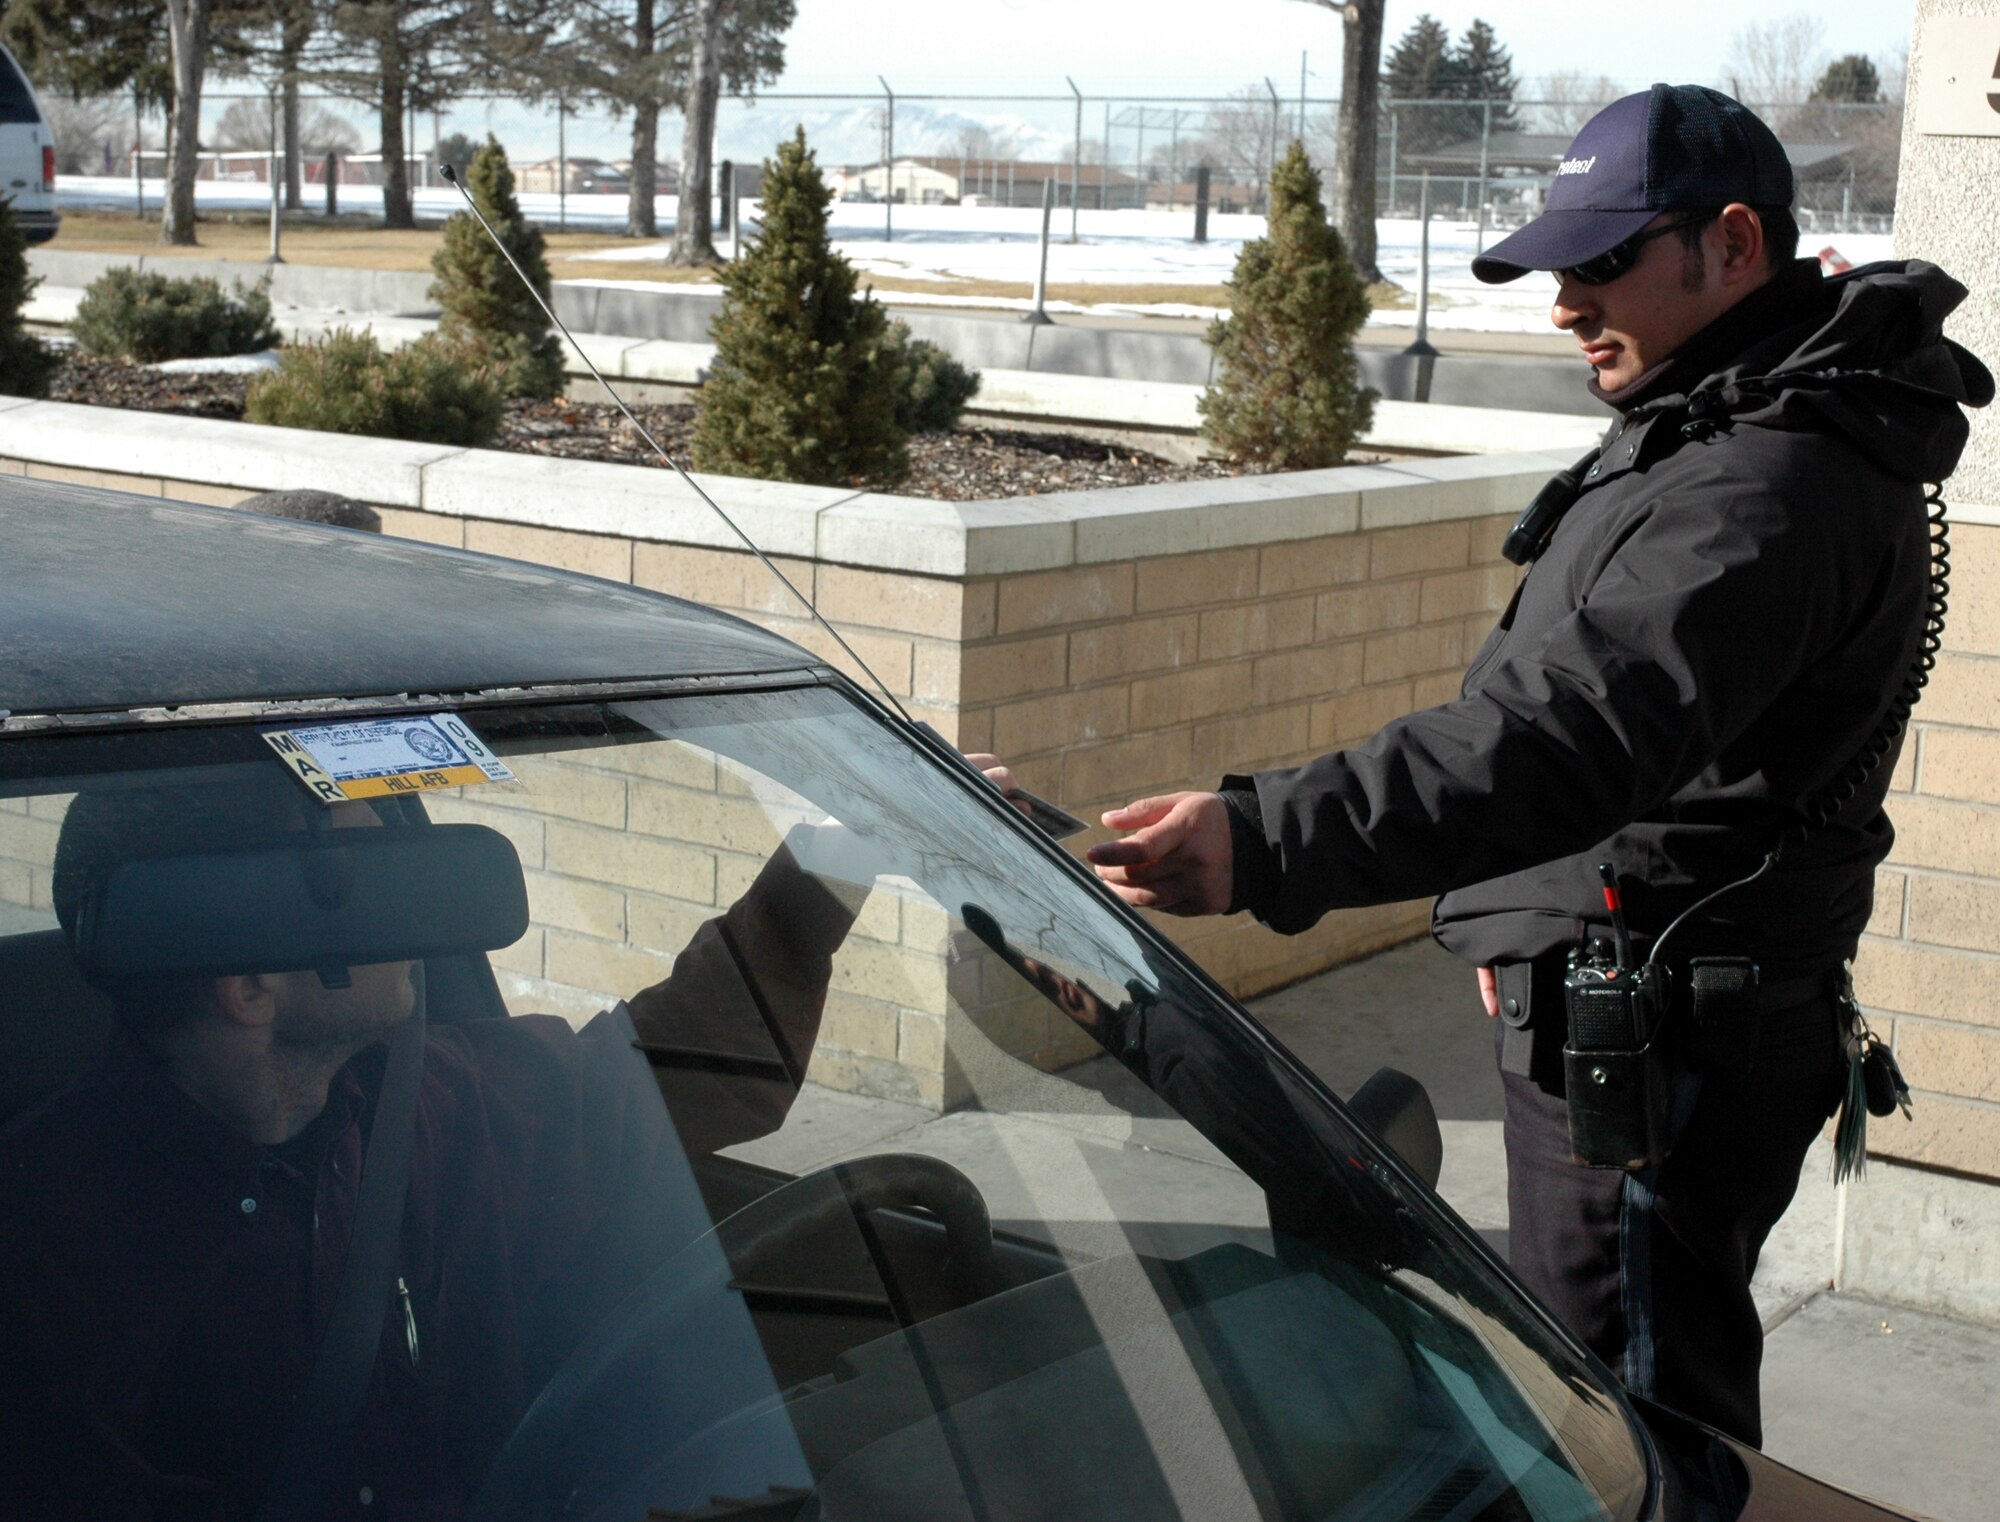 Because ID checks are required to access the base, car decals will soon be a sight of the past. Their use has been eliminated as part of an AFSO 21 initiative, saving the base millions of dollars. 